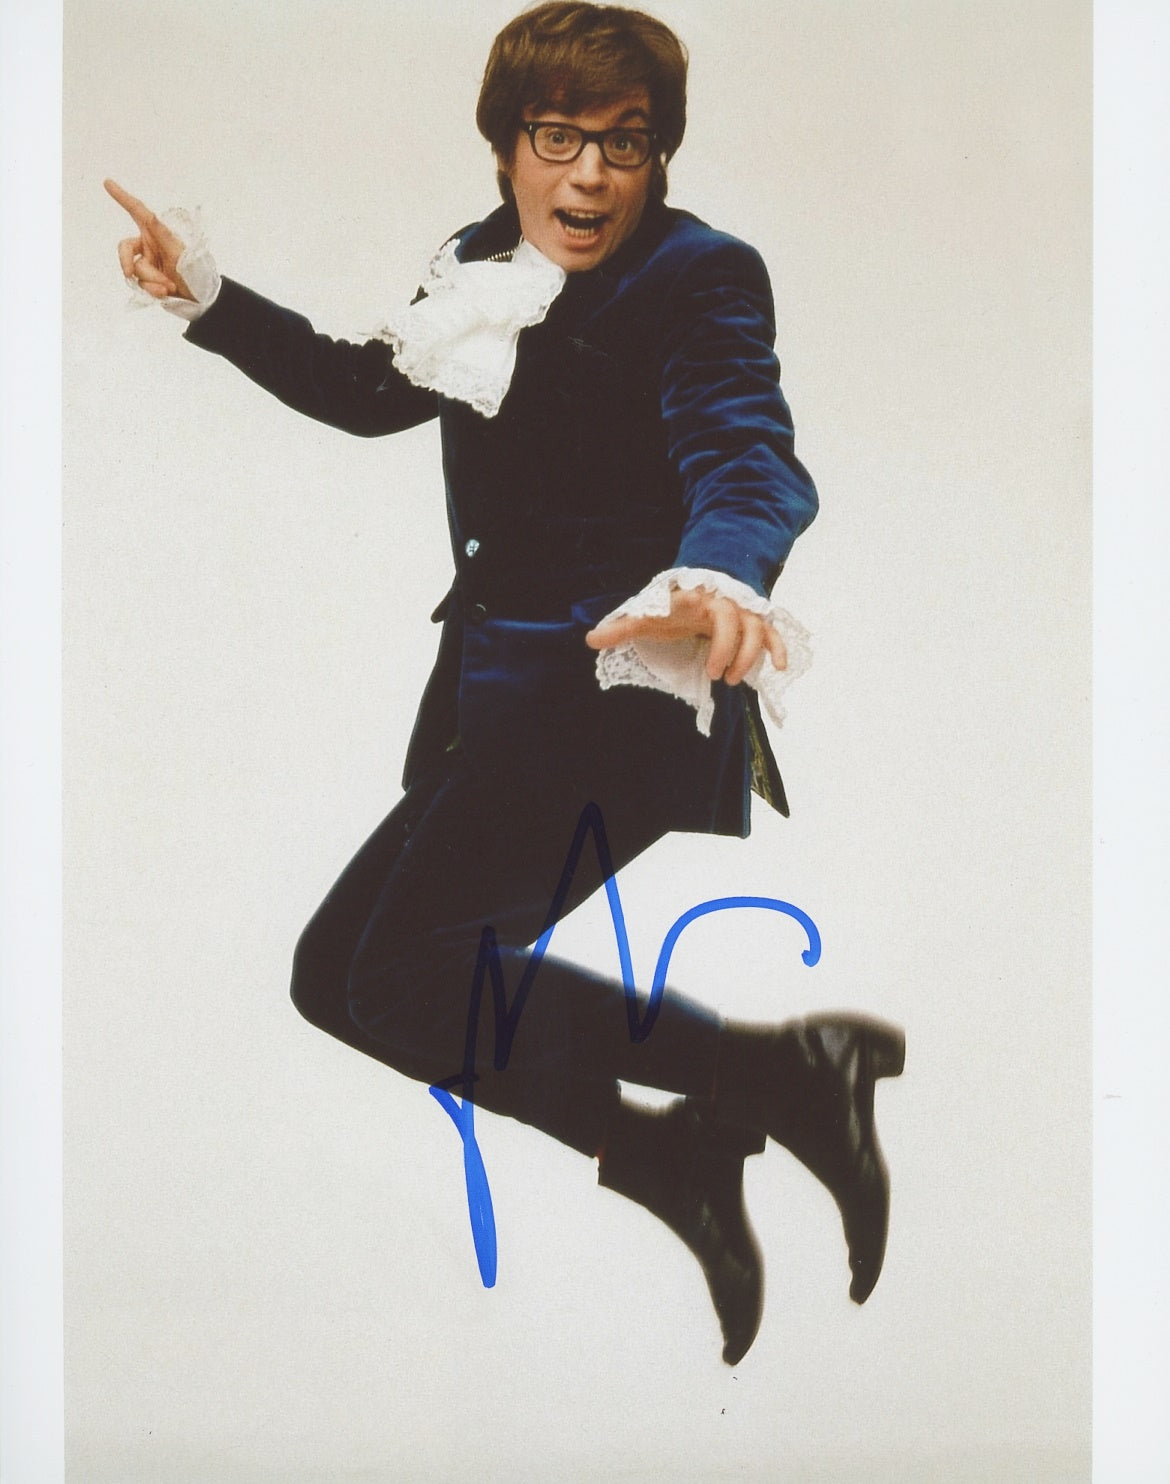 Mike Myers Signed 8x10 Photo - Video Proof